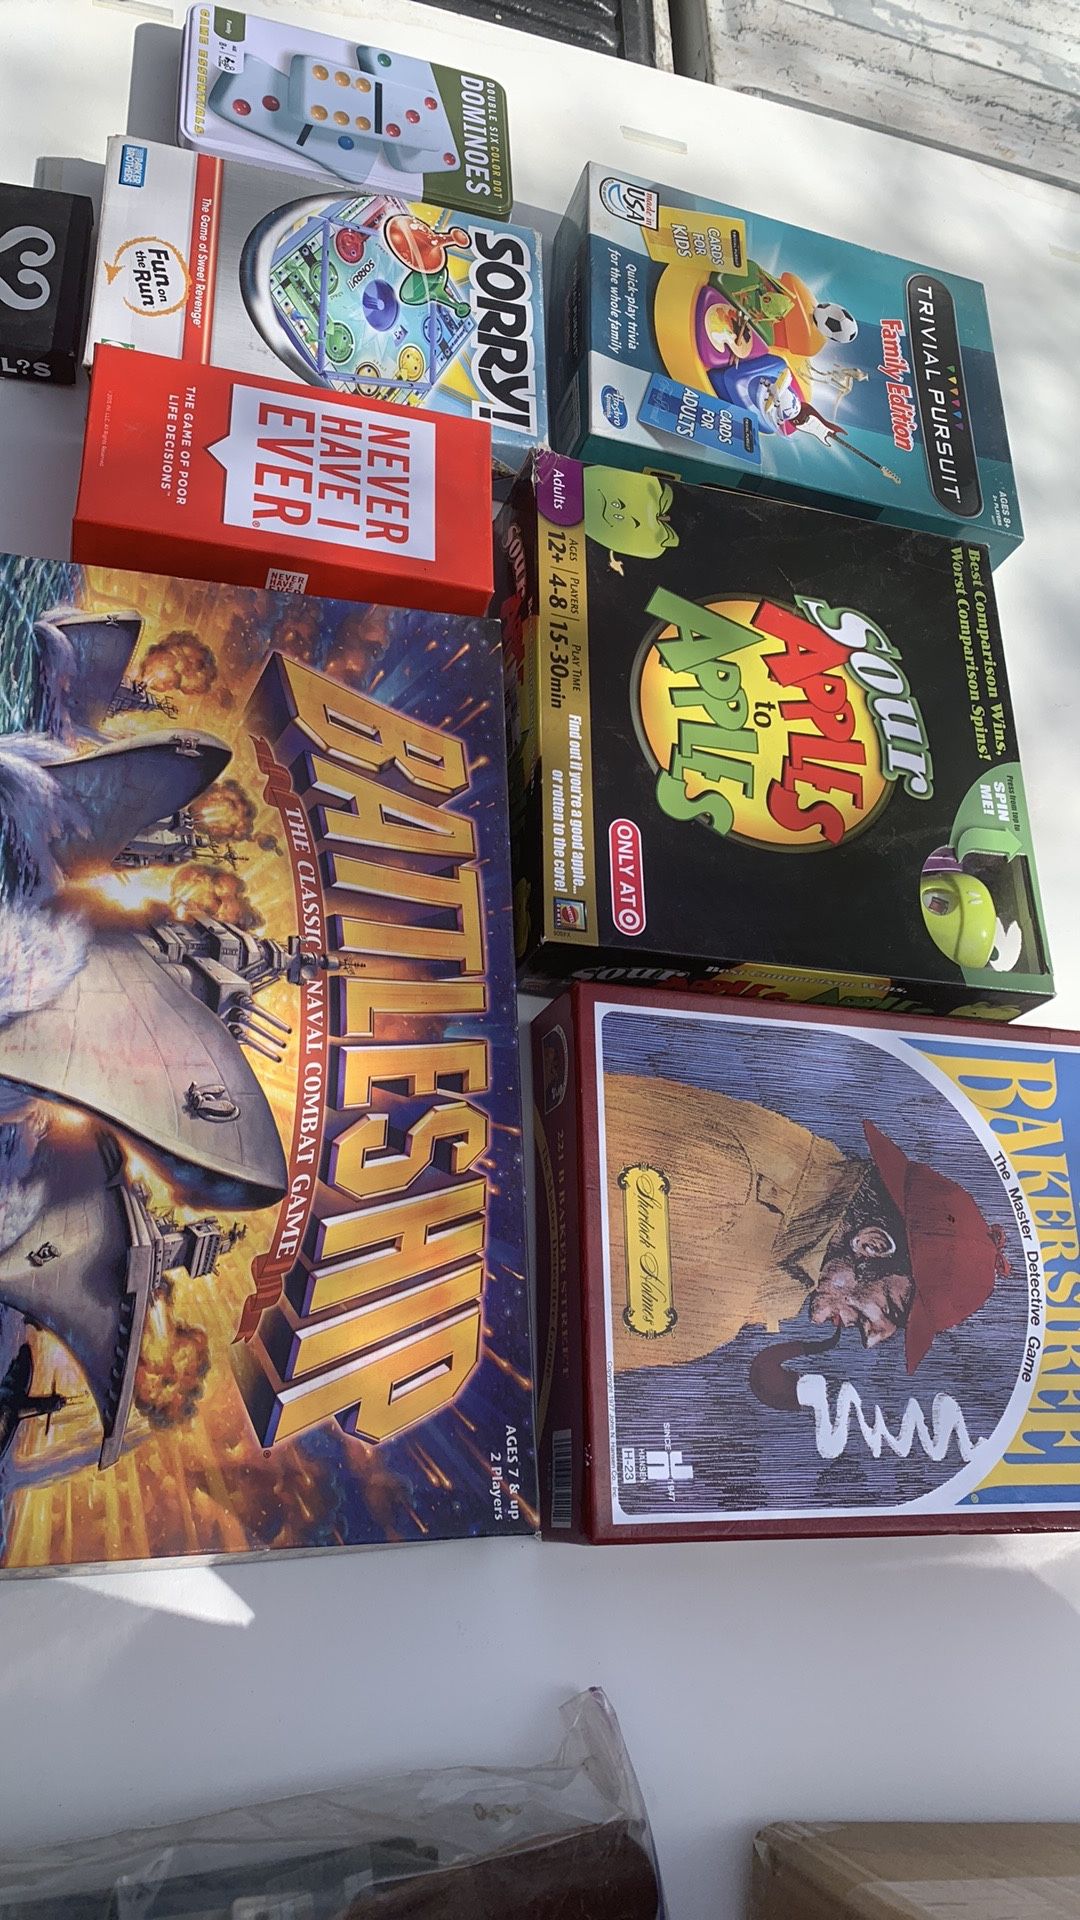 Eight different Family board games in excellent condition. 